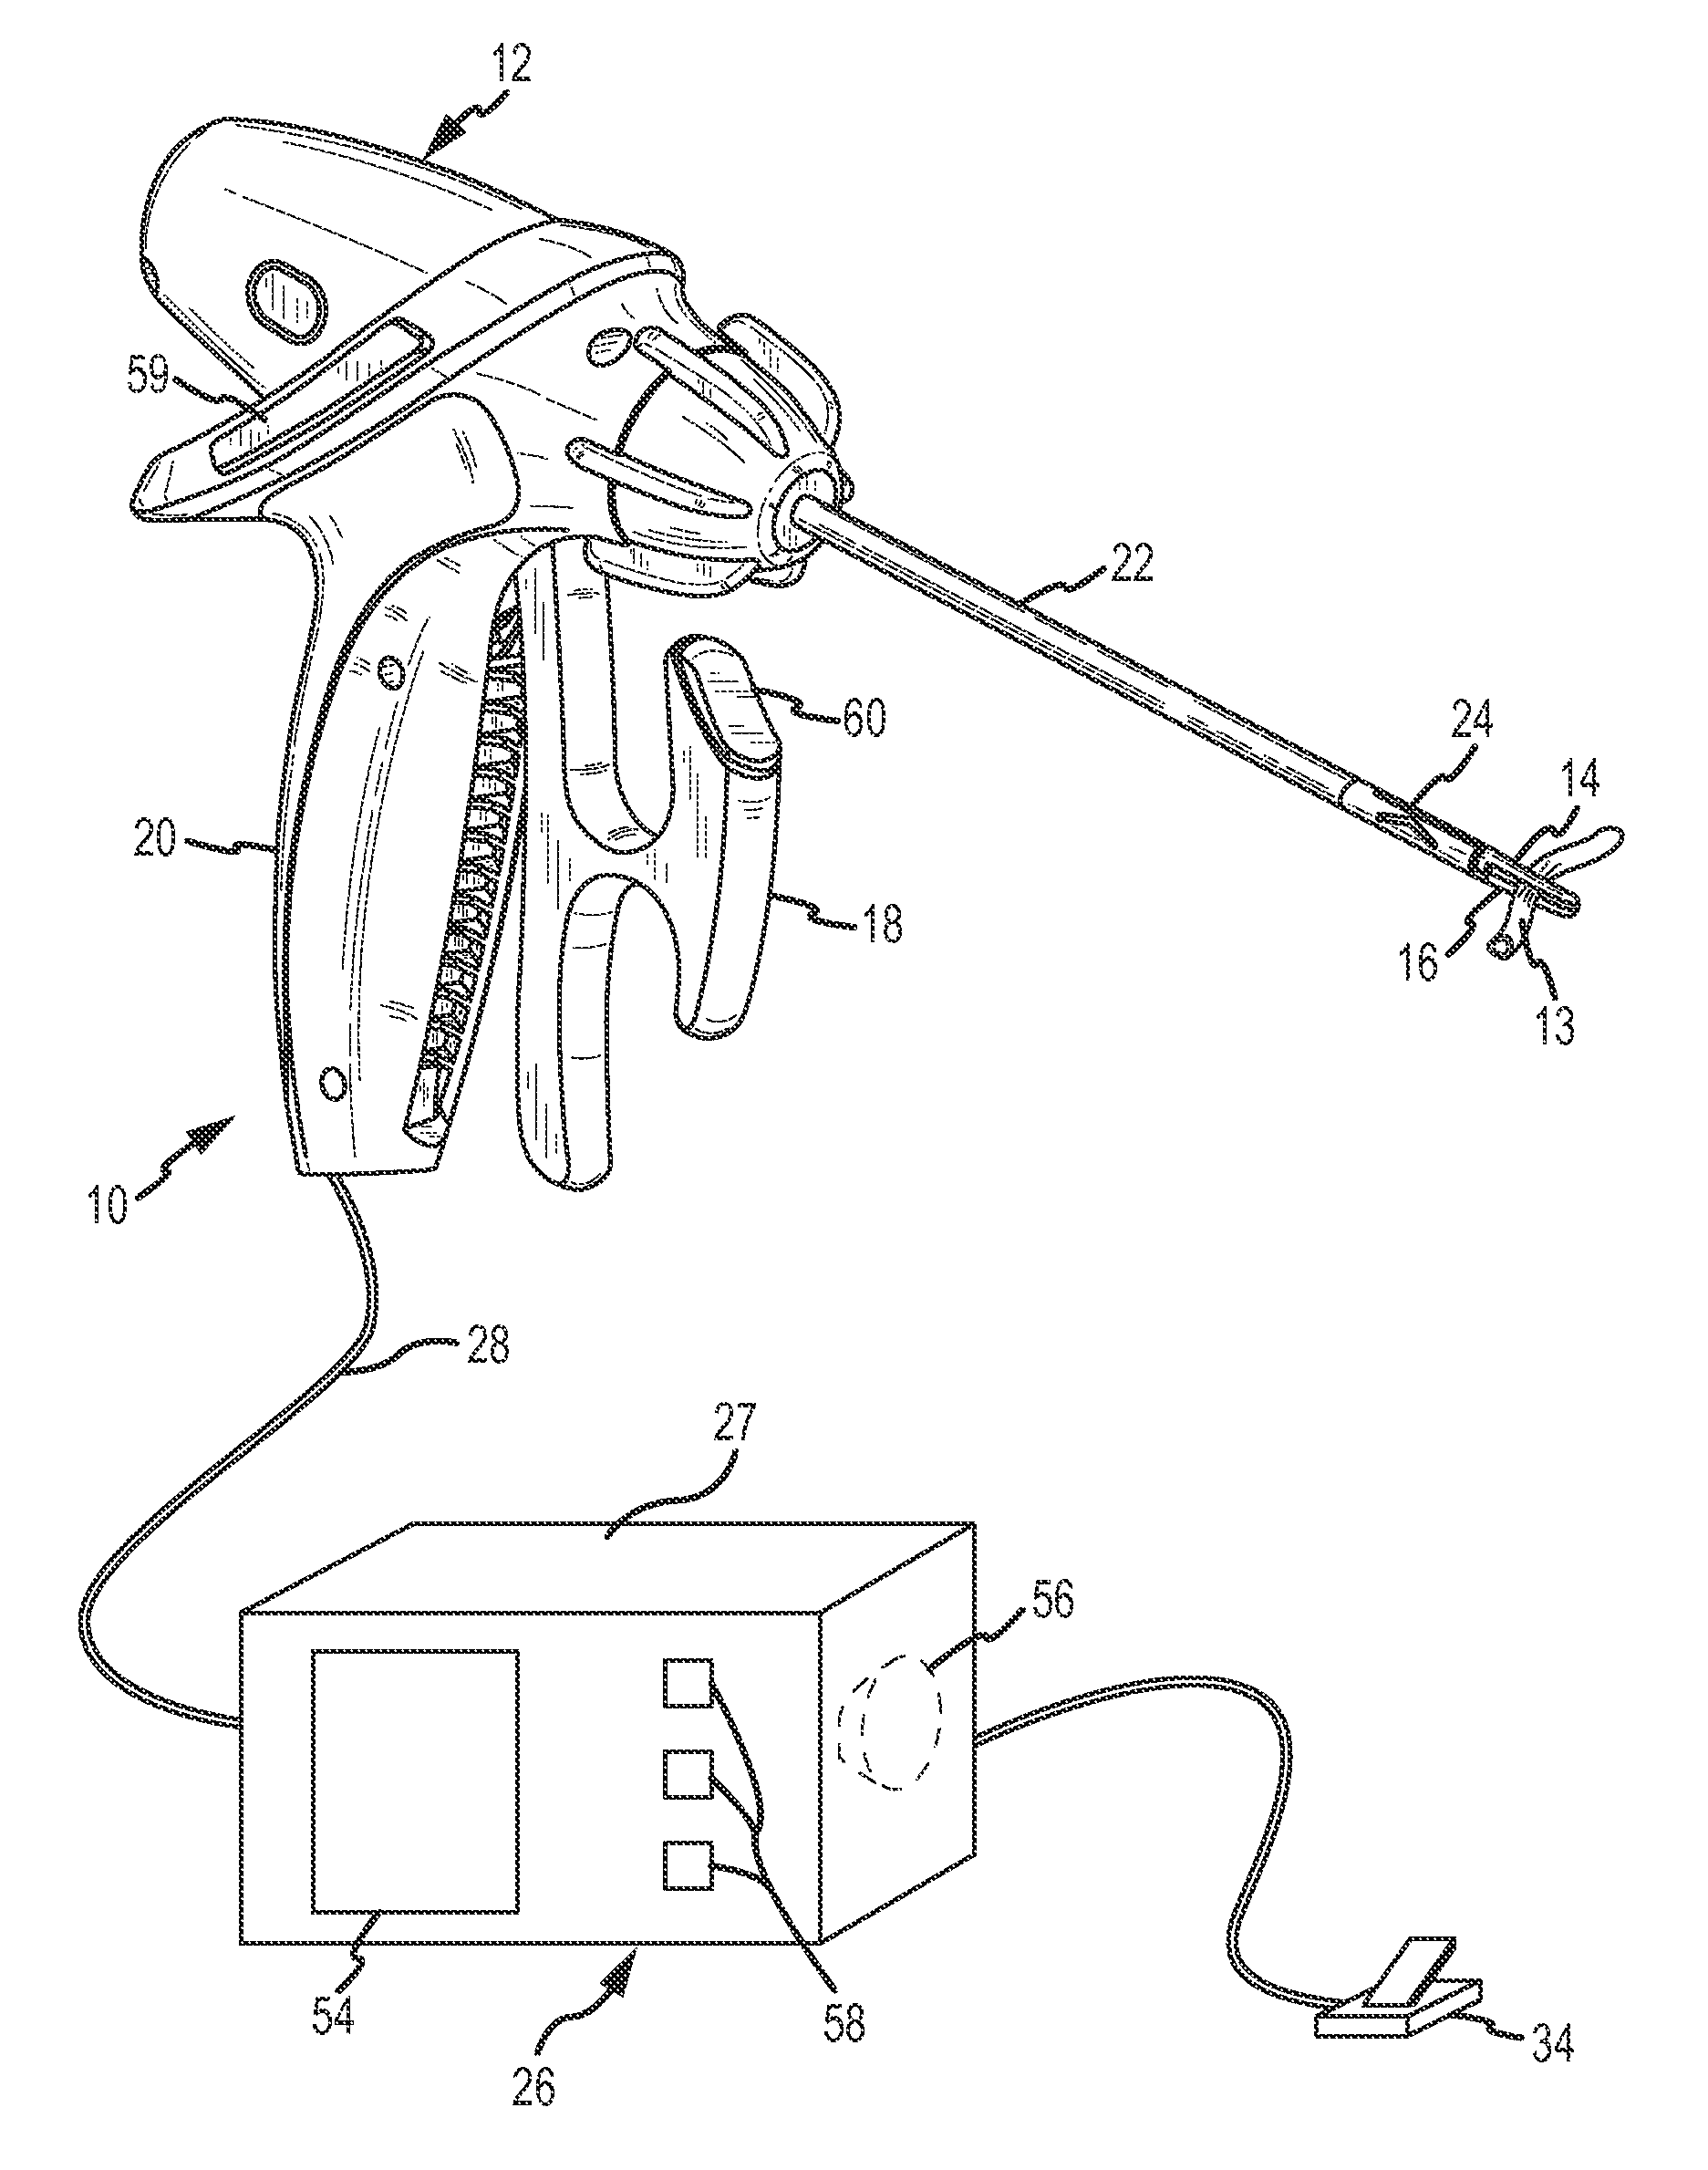 Tissue fusion system and method of performing a functional verification test